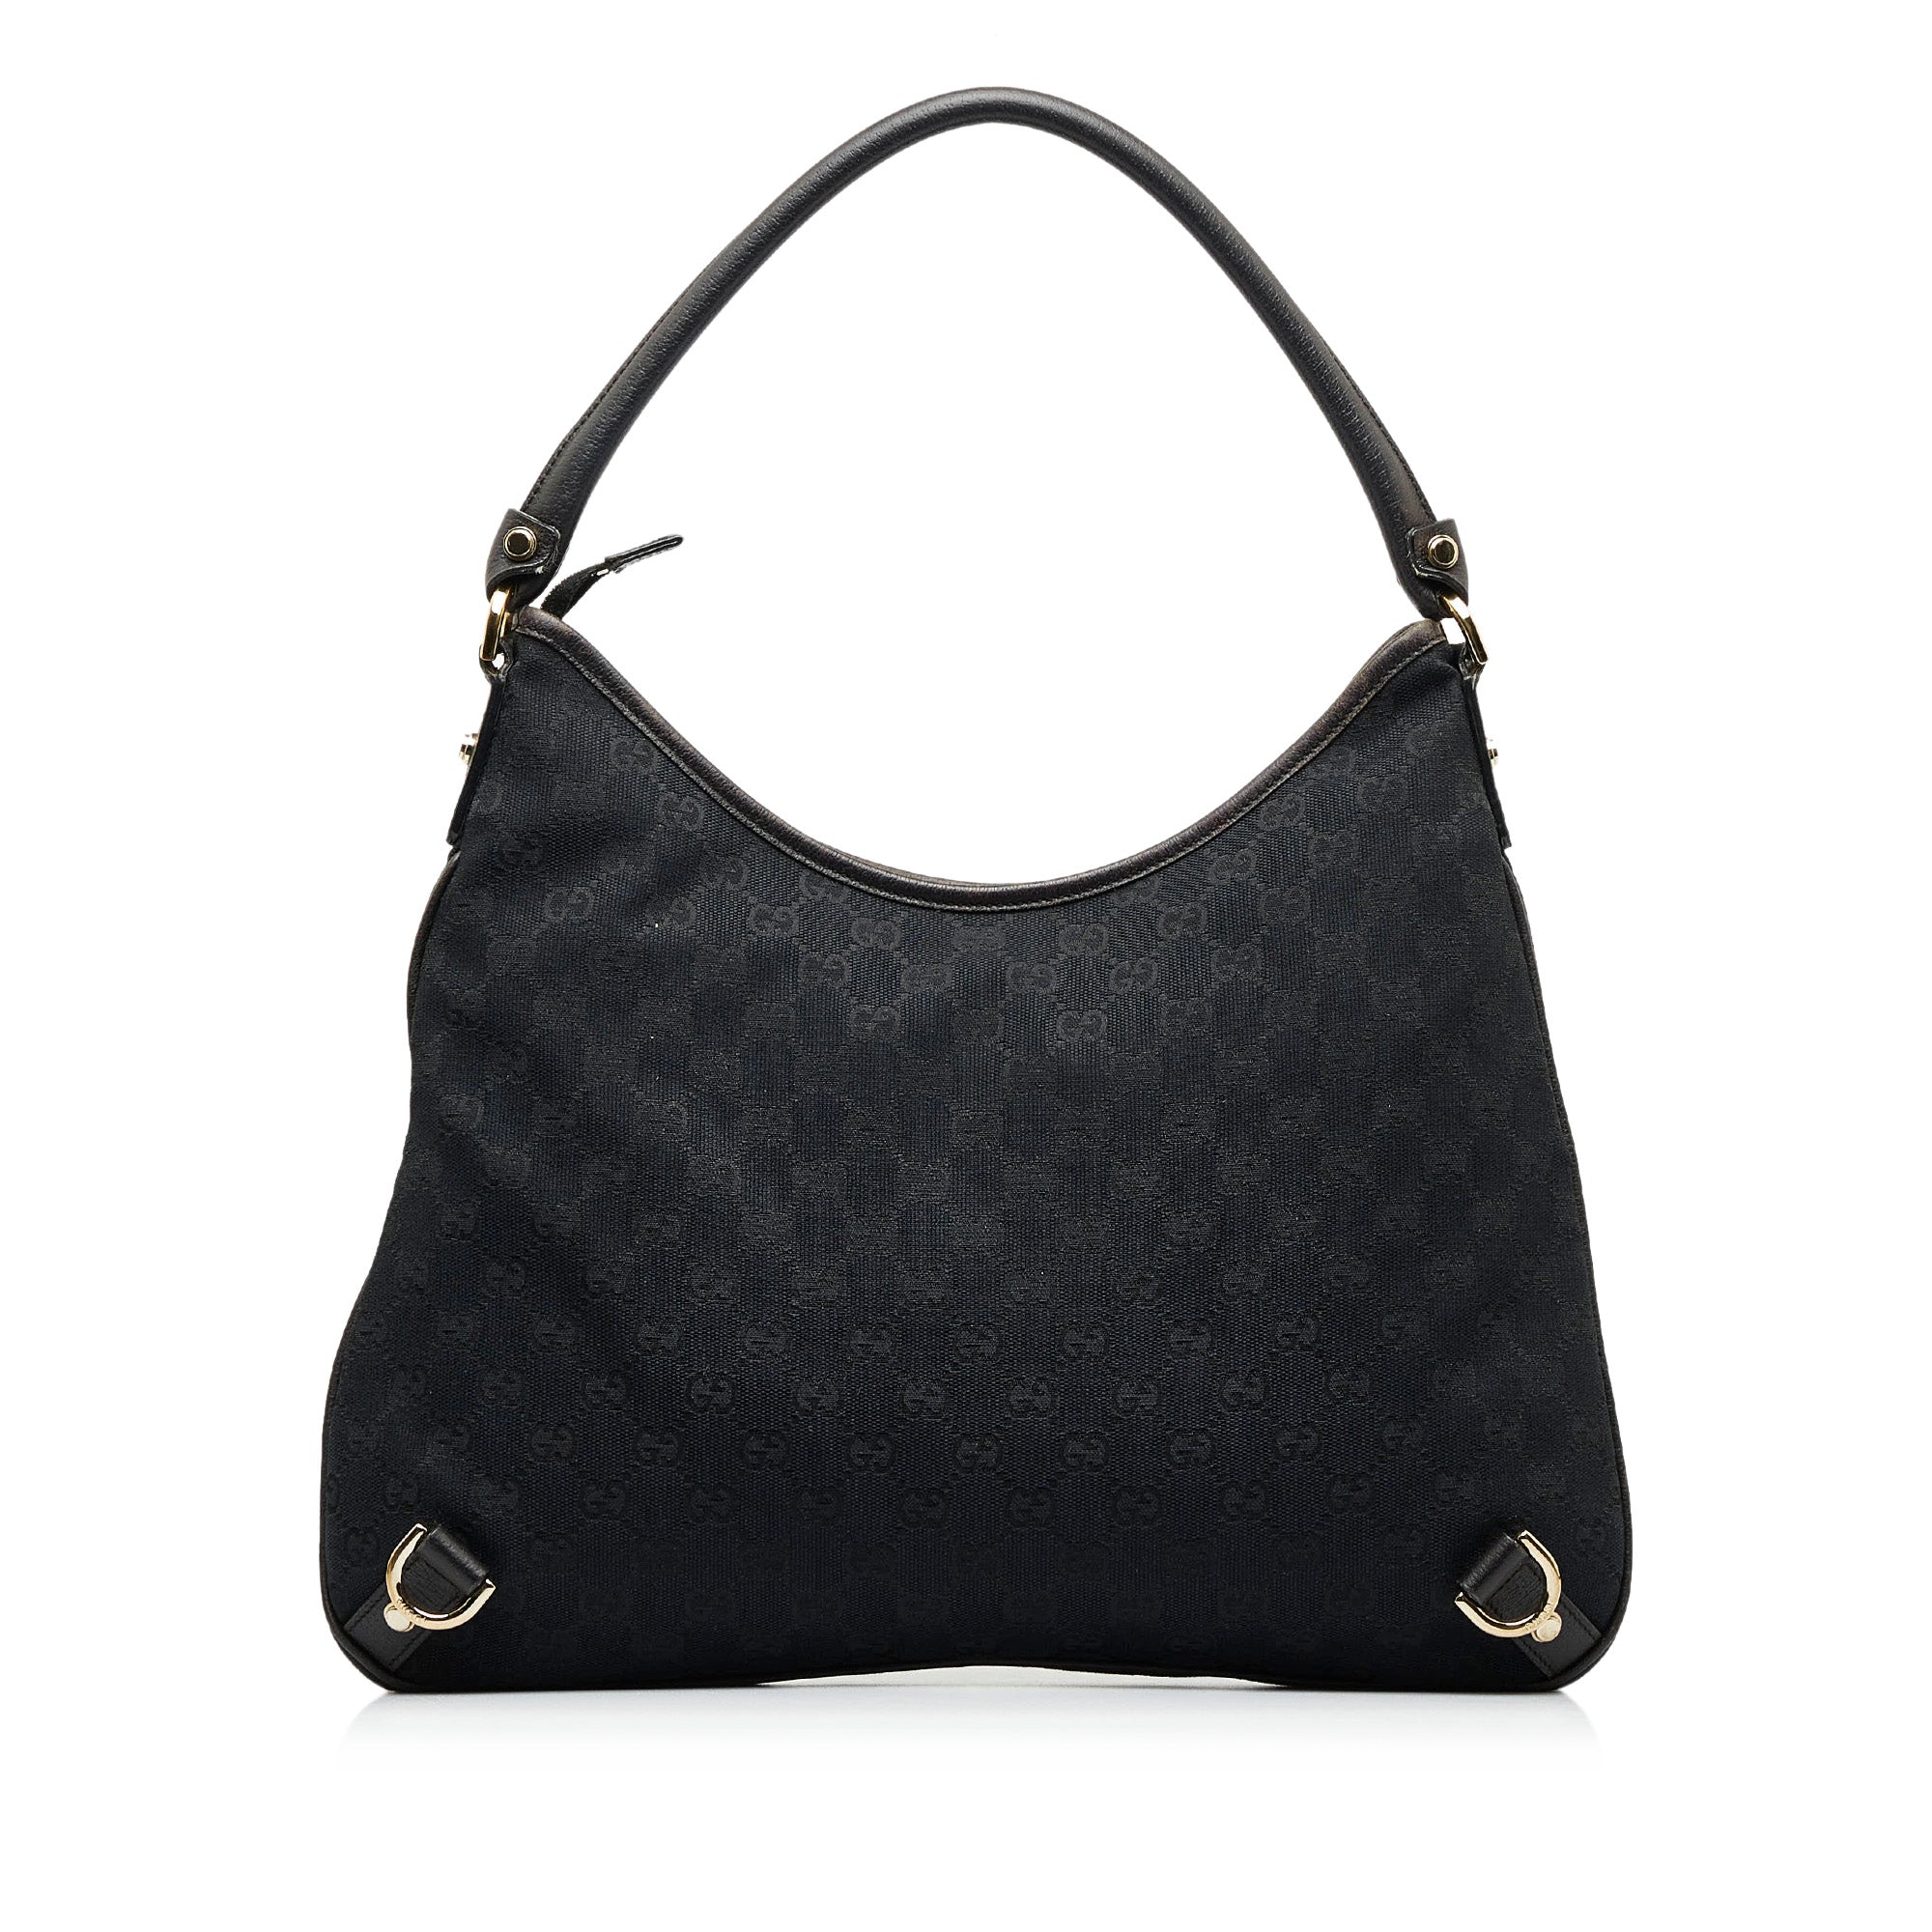 Gucci Abbey GG Canvas Shoulder Bag in Black | Lord & Taylor